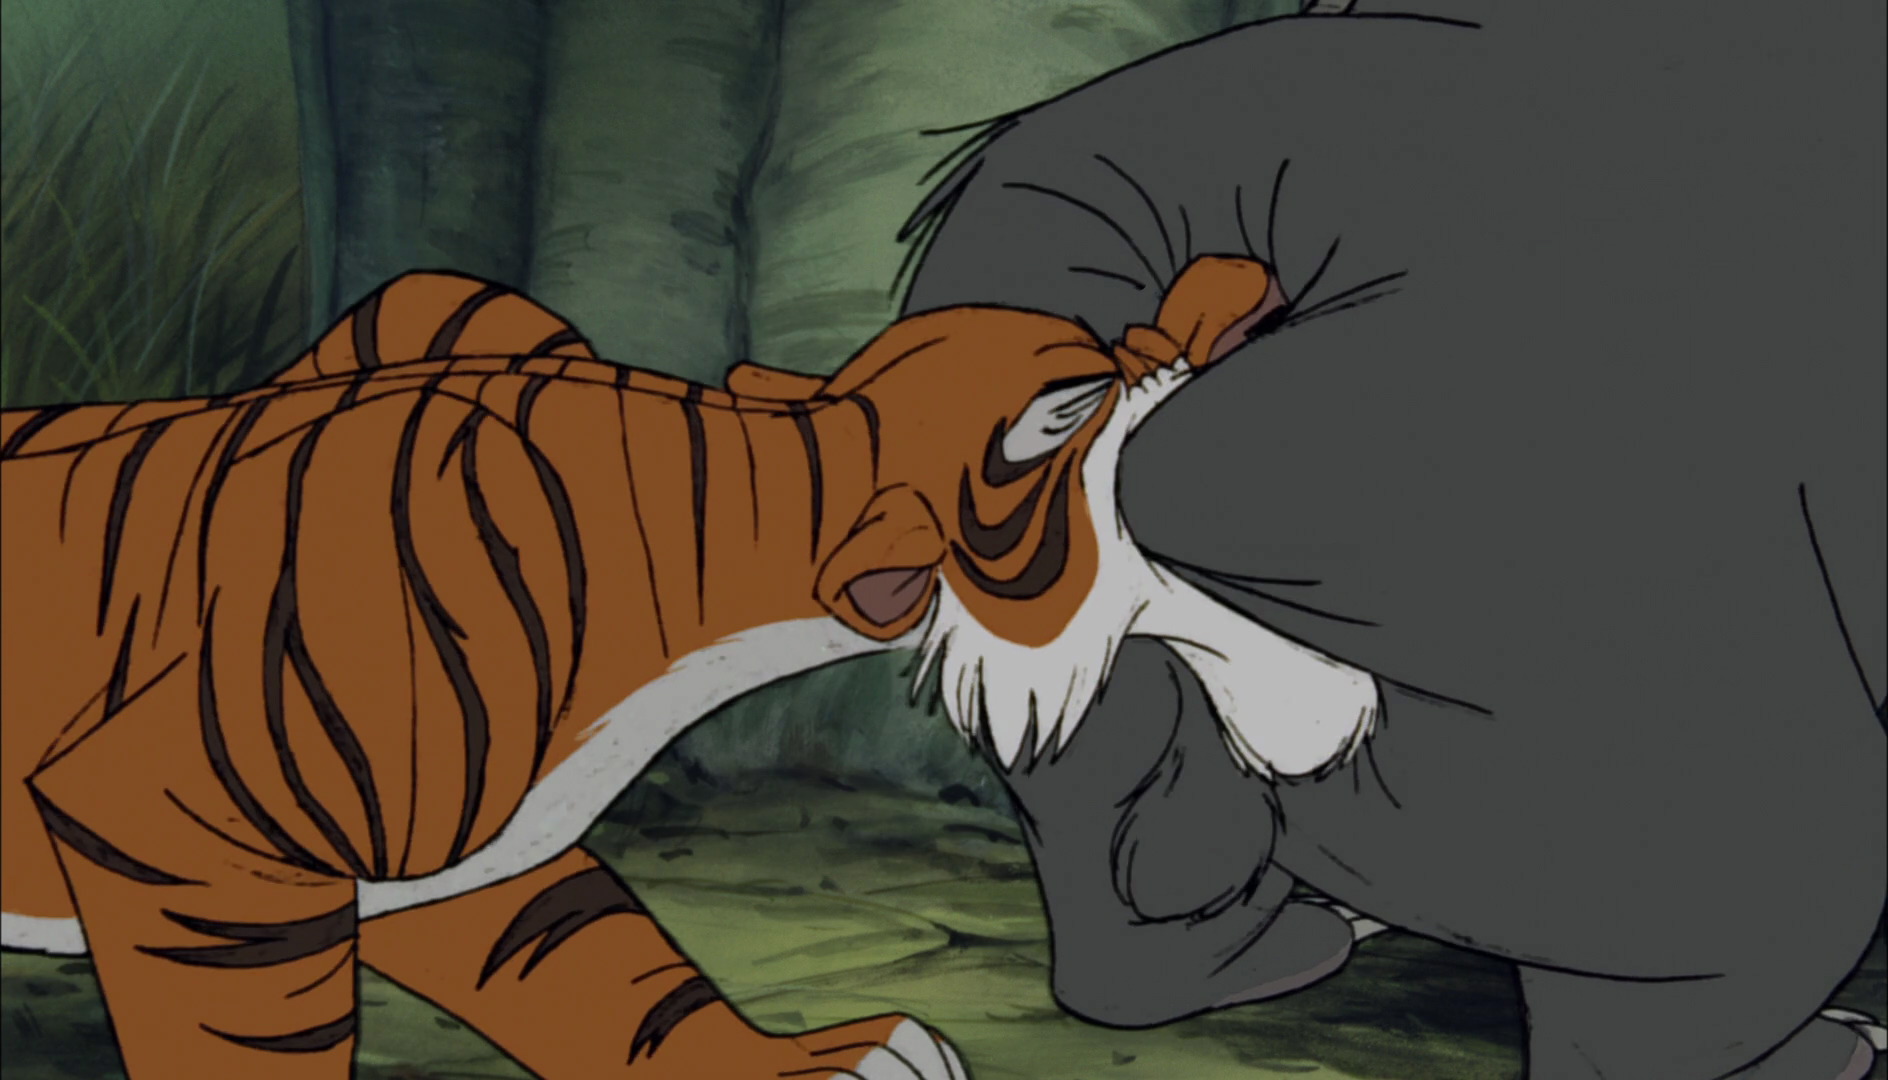 Shere Khan the Tiger has bite Baloo the Bear on the butt